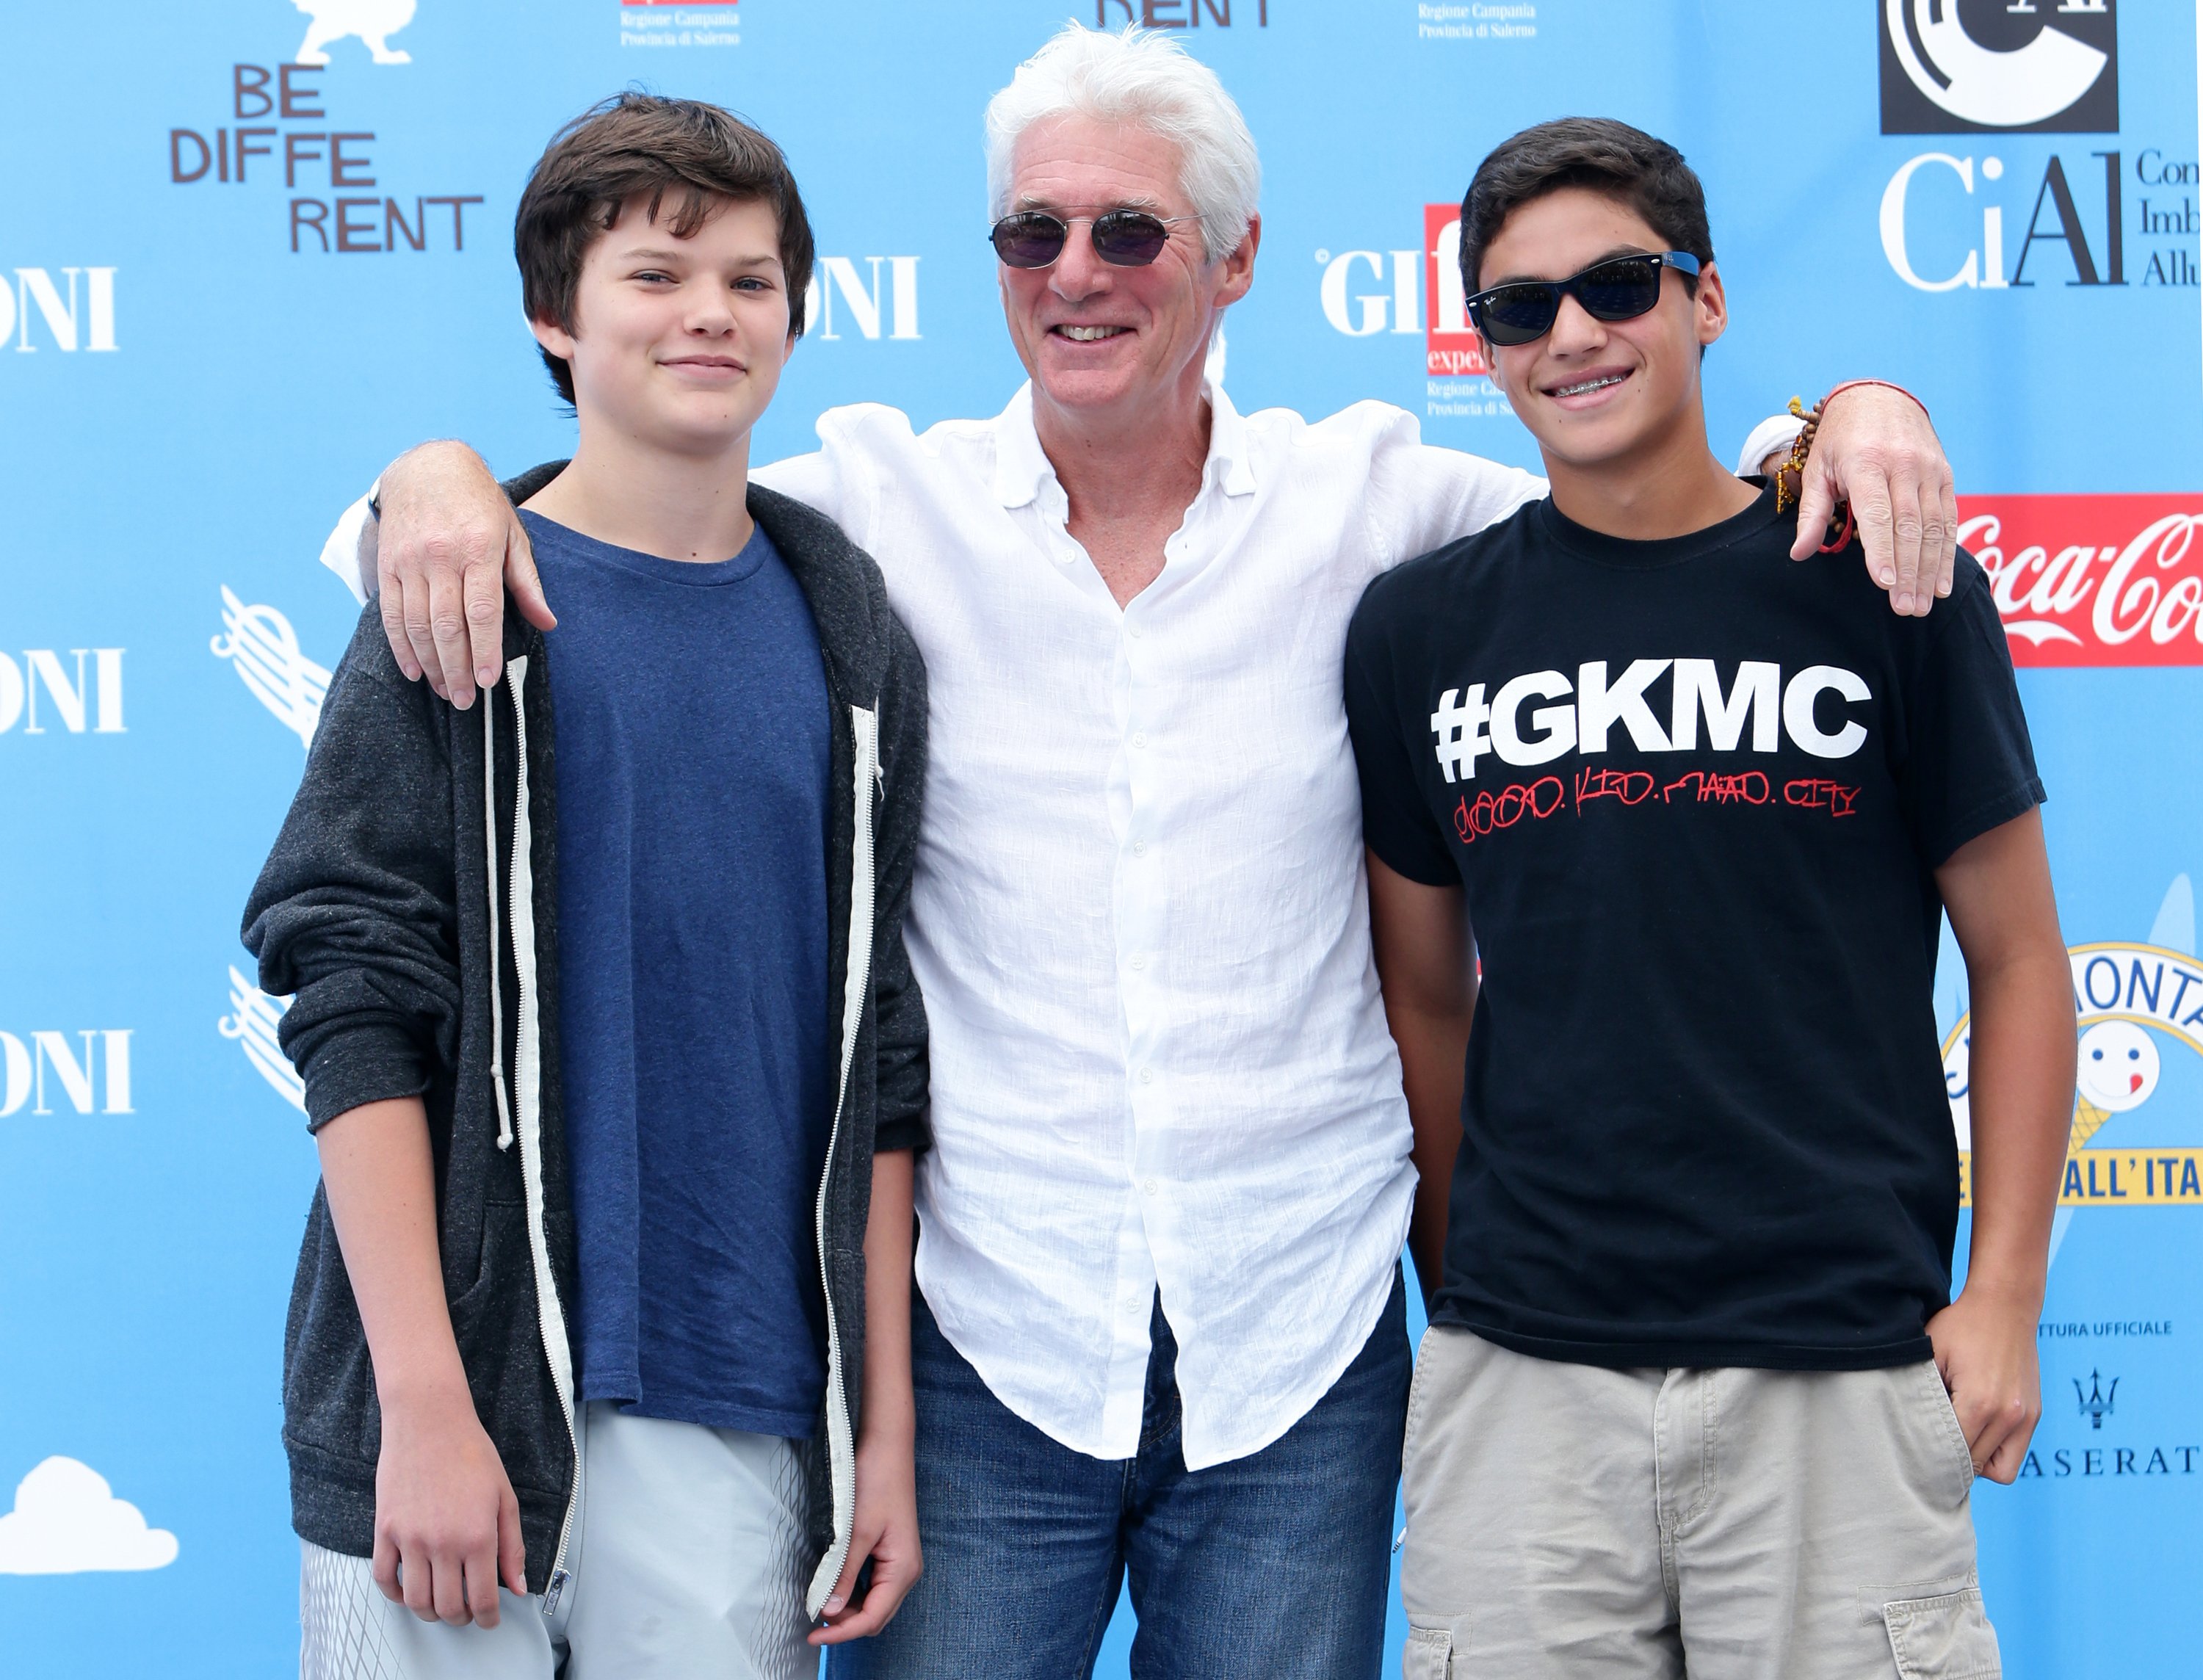 Homer James Jigme Gere, Richard Gere, and Homer's friend at the Giffoni Film Festival photocall on July 22, 2014 | Source: Getty Images